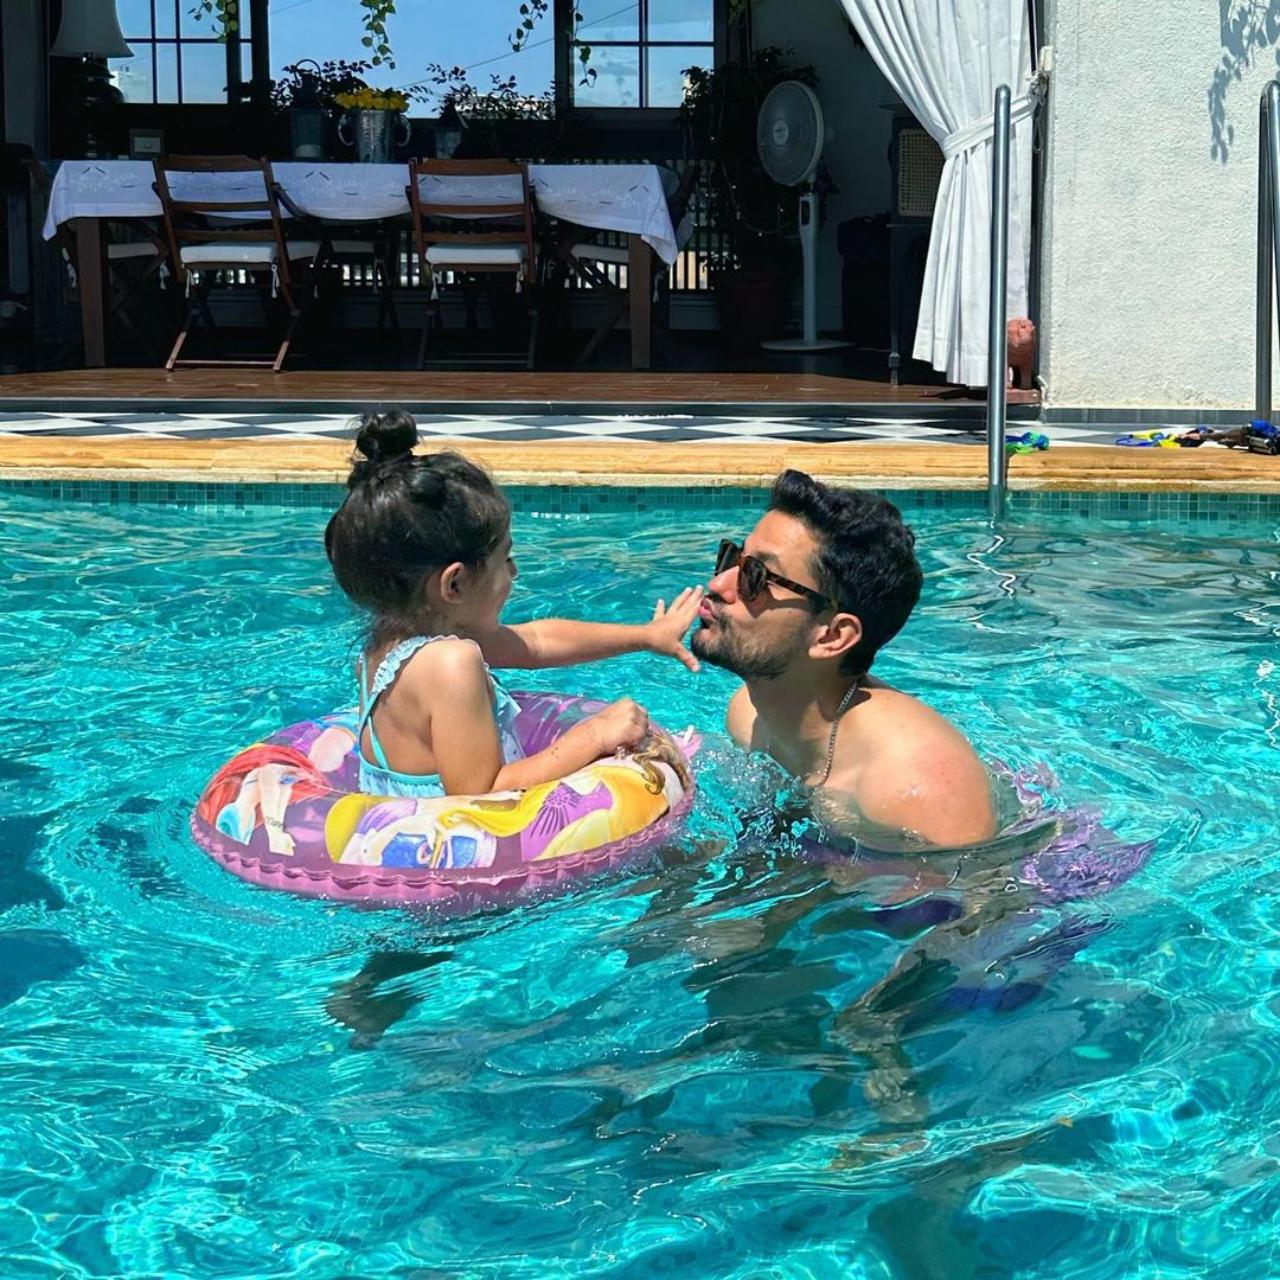 In another sweet picture, Kunal took to the pool along with his daughter